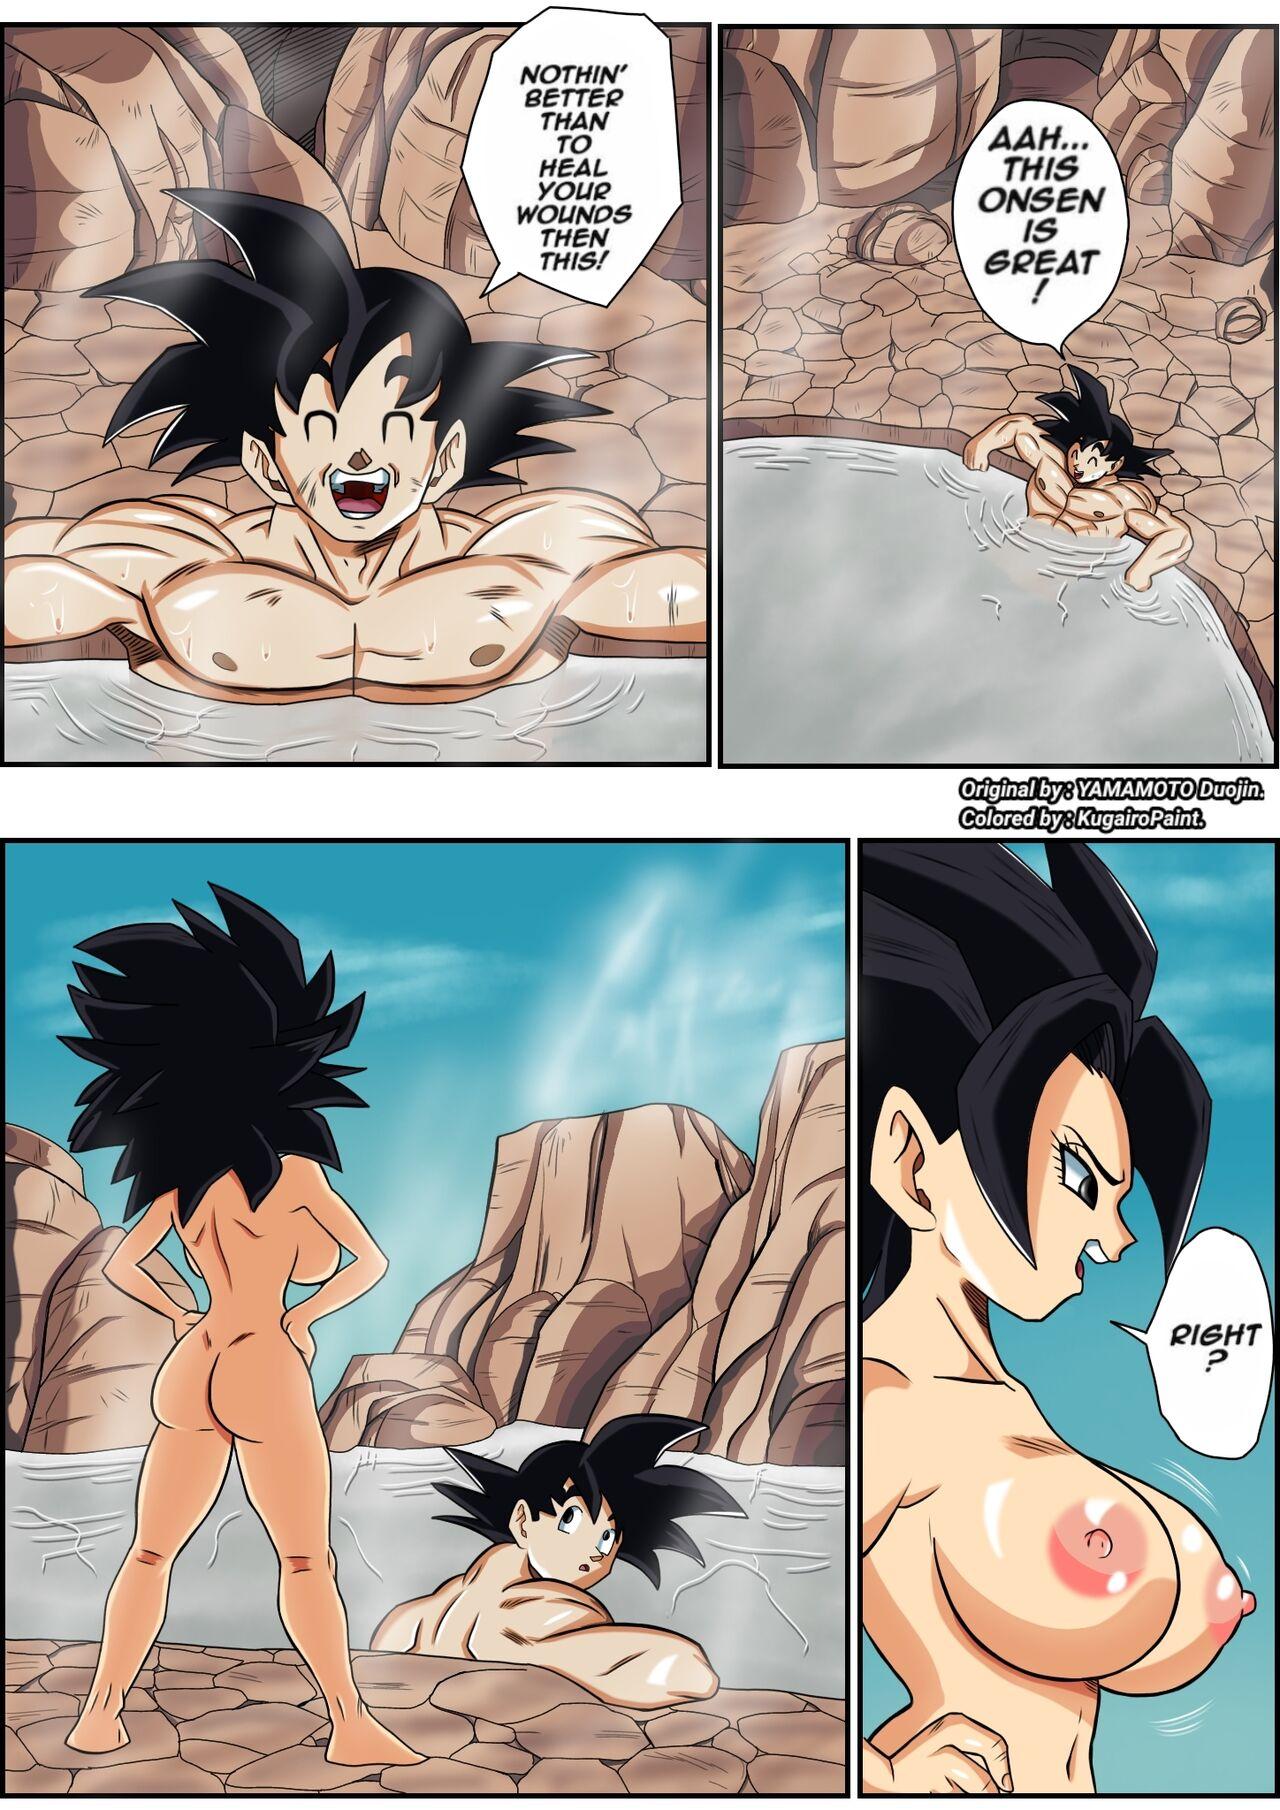 Tiny Fight in the 6th Universe!! - Dragon ball super Taiwan - Page 7